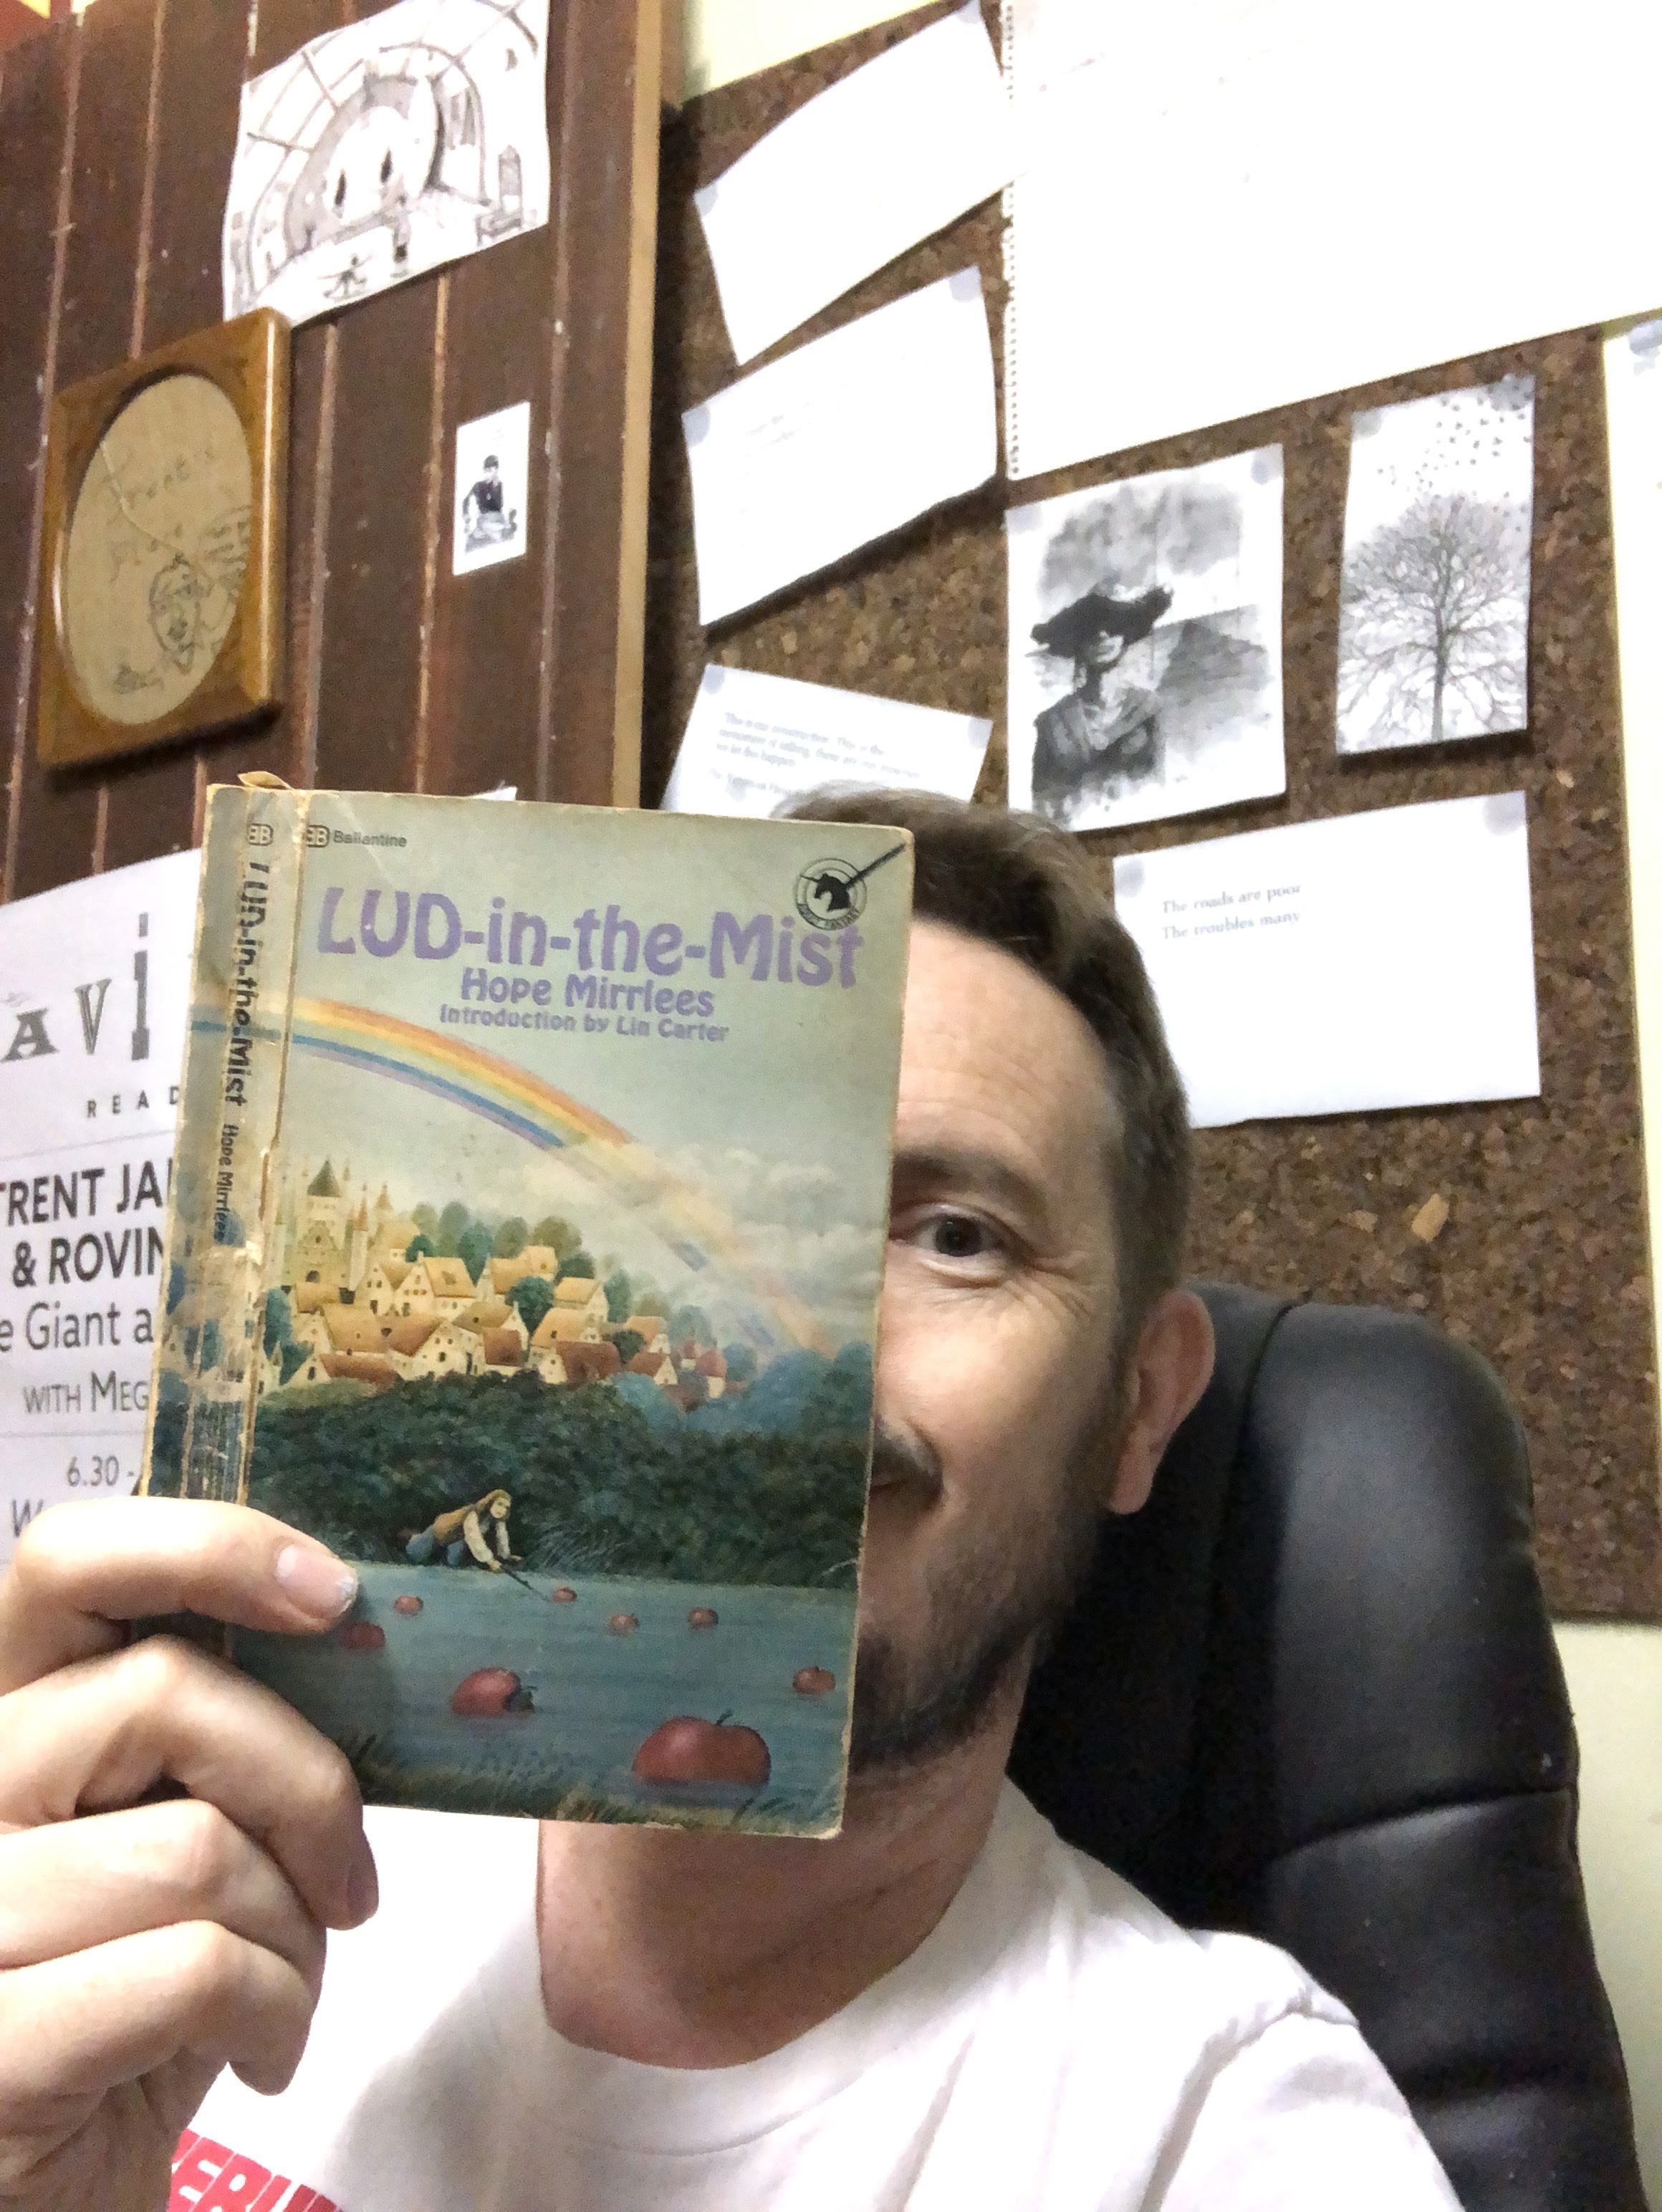 Trent Jamieson holds up a copy of Lud-in-the-mist by Hope Mirrlees. Trent sits in front of a pin board